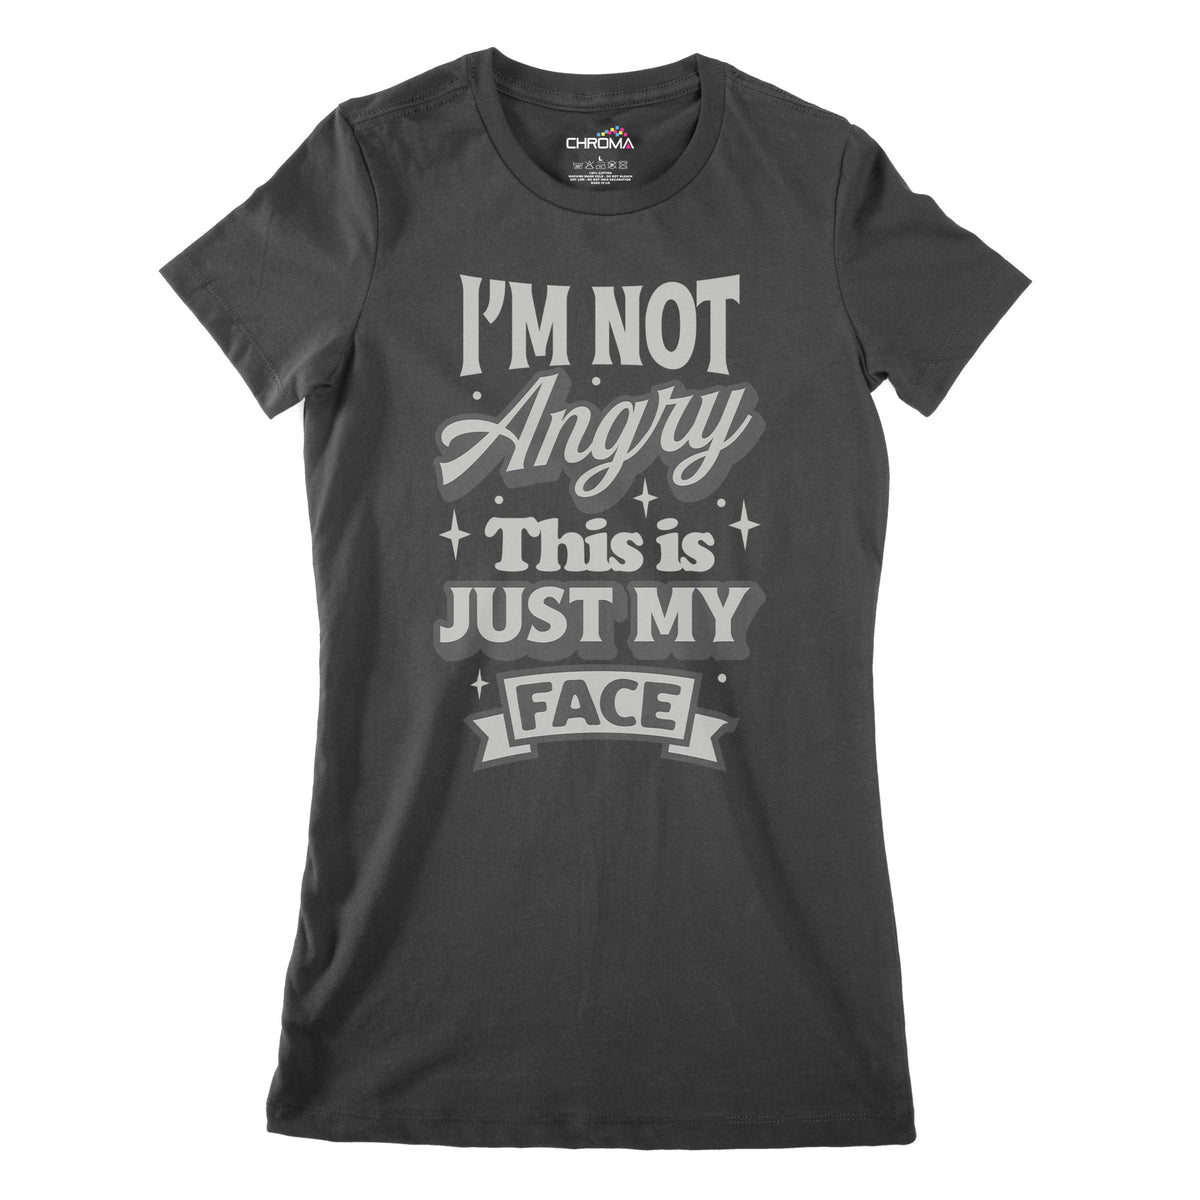 I'm Not Angry This Is Just My Face | Women's Classic Fitted T-Shirt Chroma Clothing